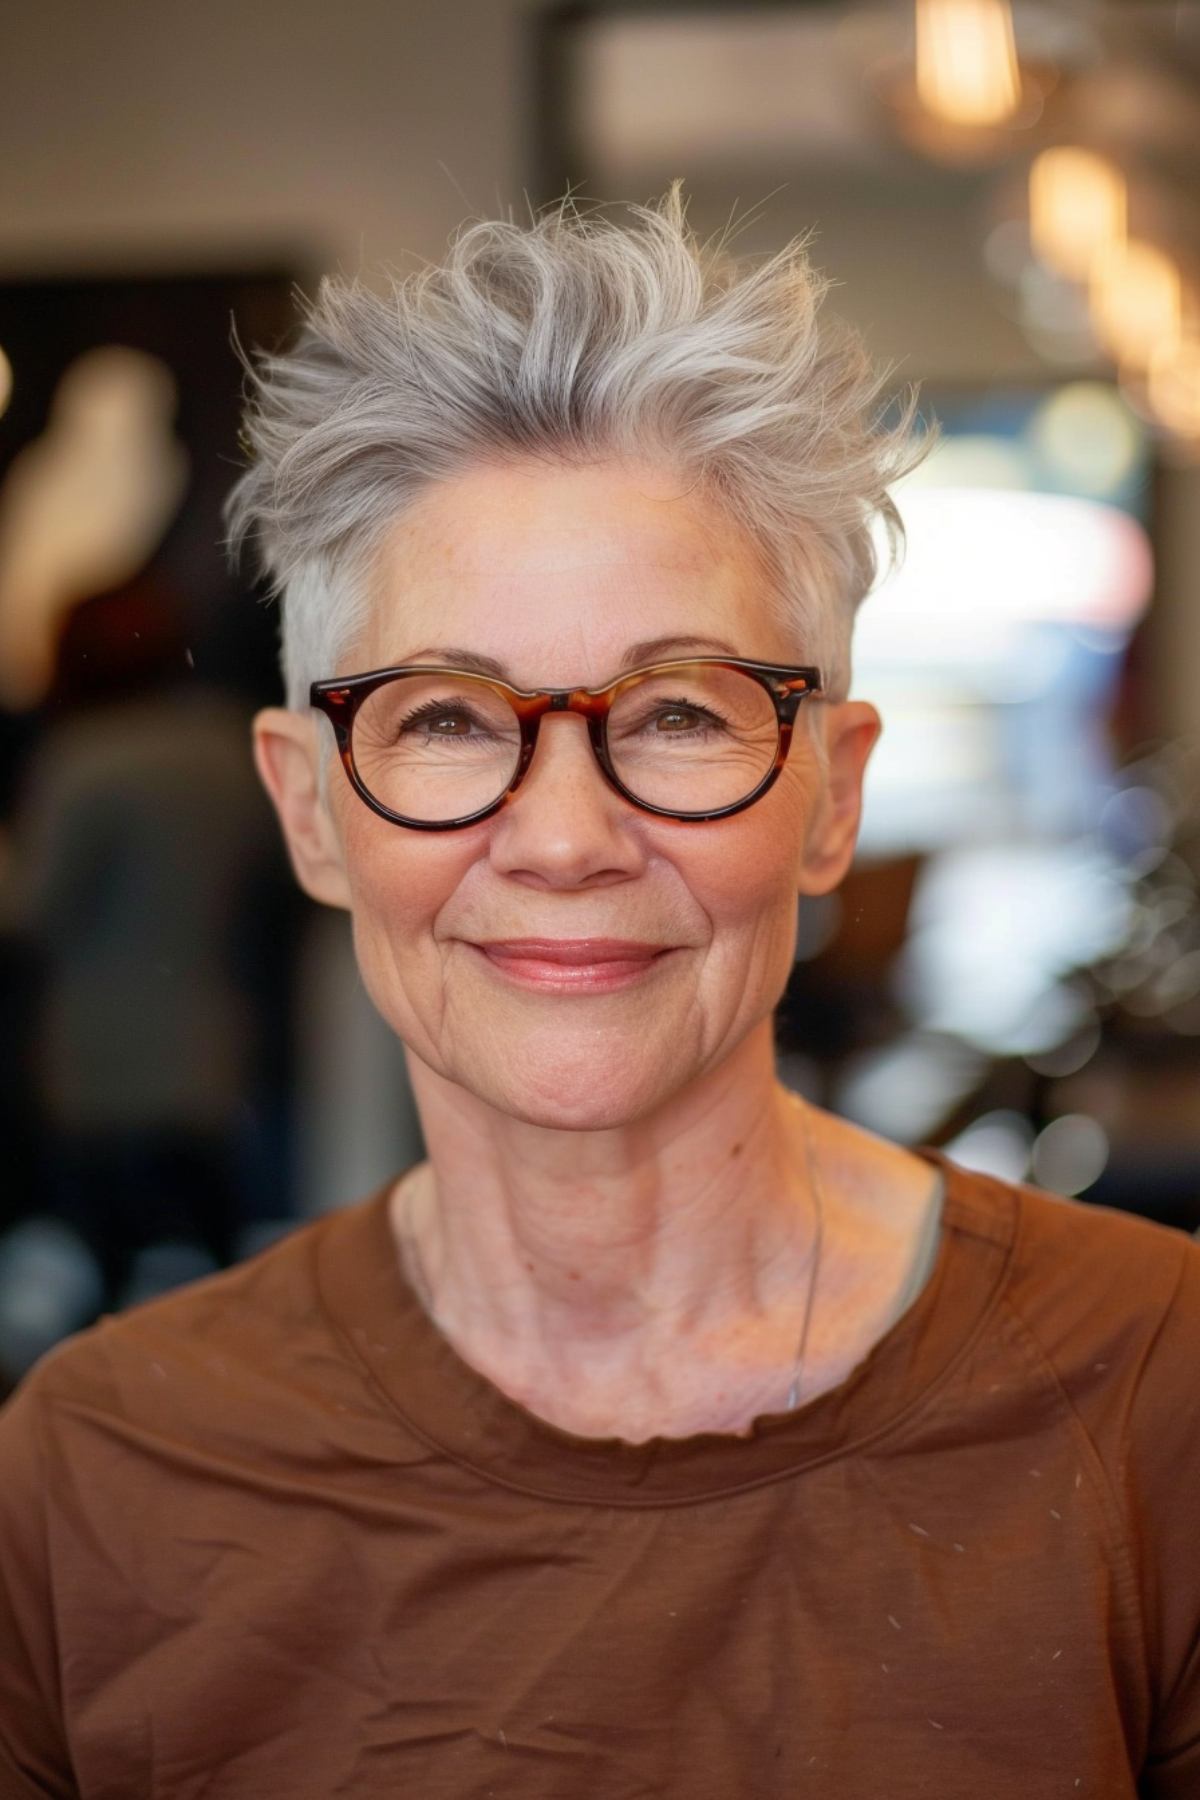 She wears glasses and has grey hair with a textured pixie cut.